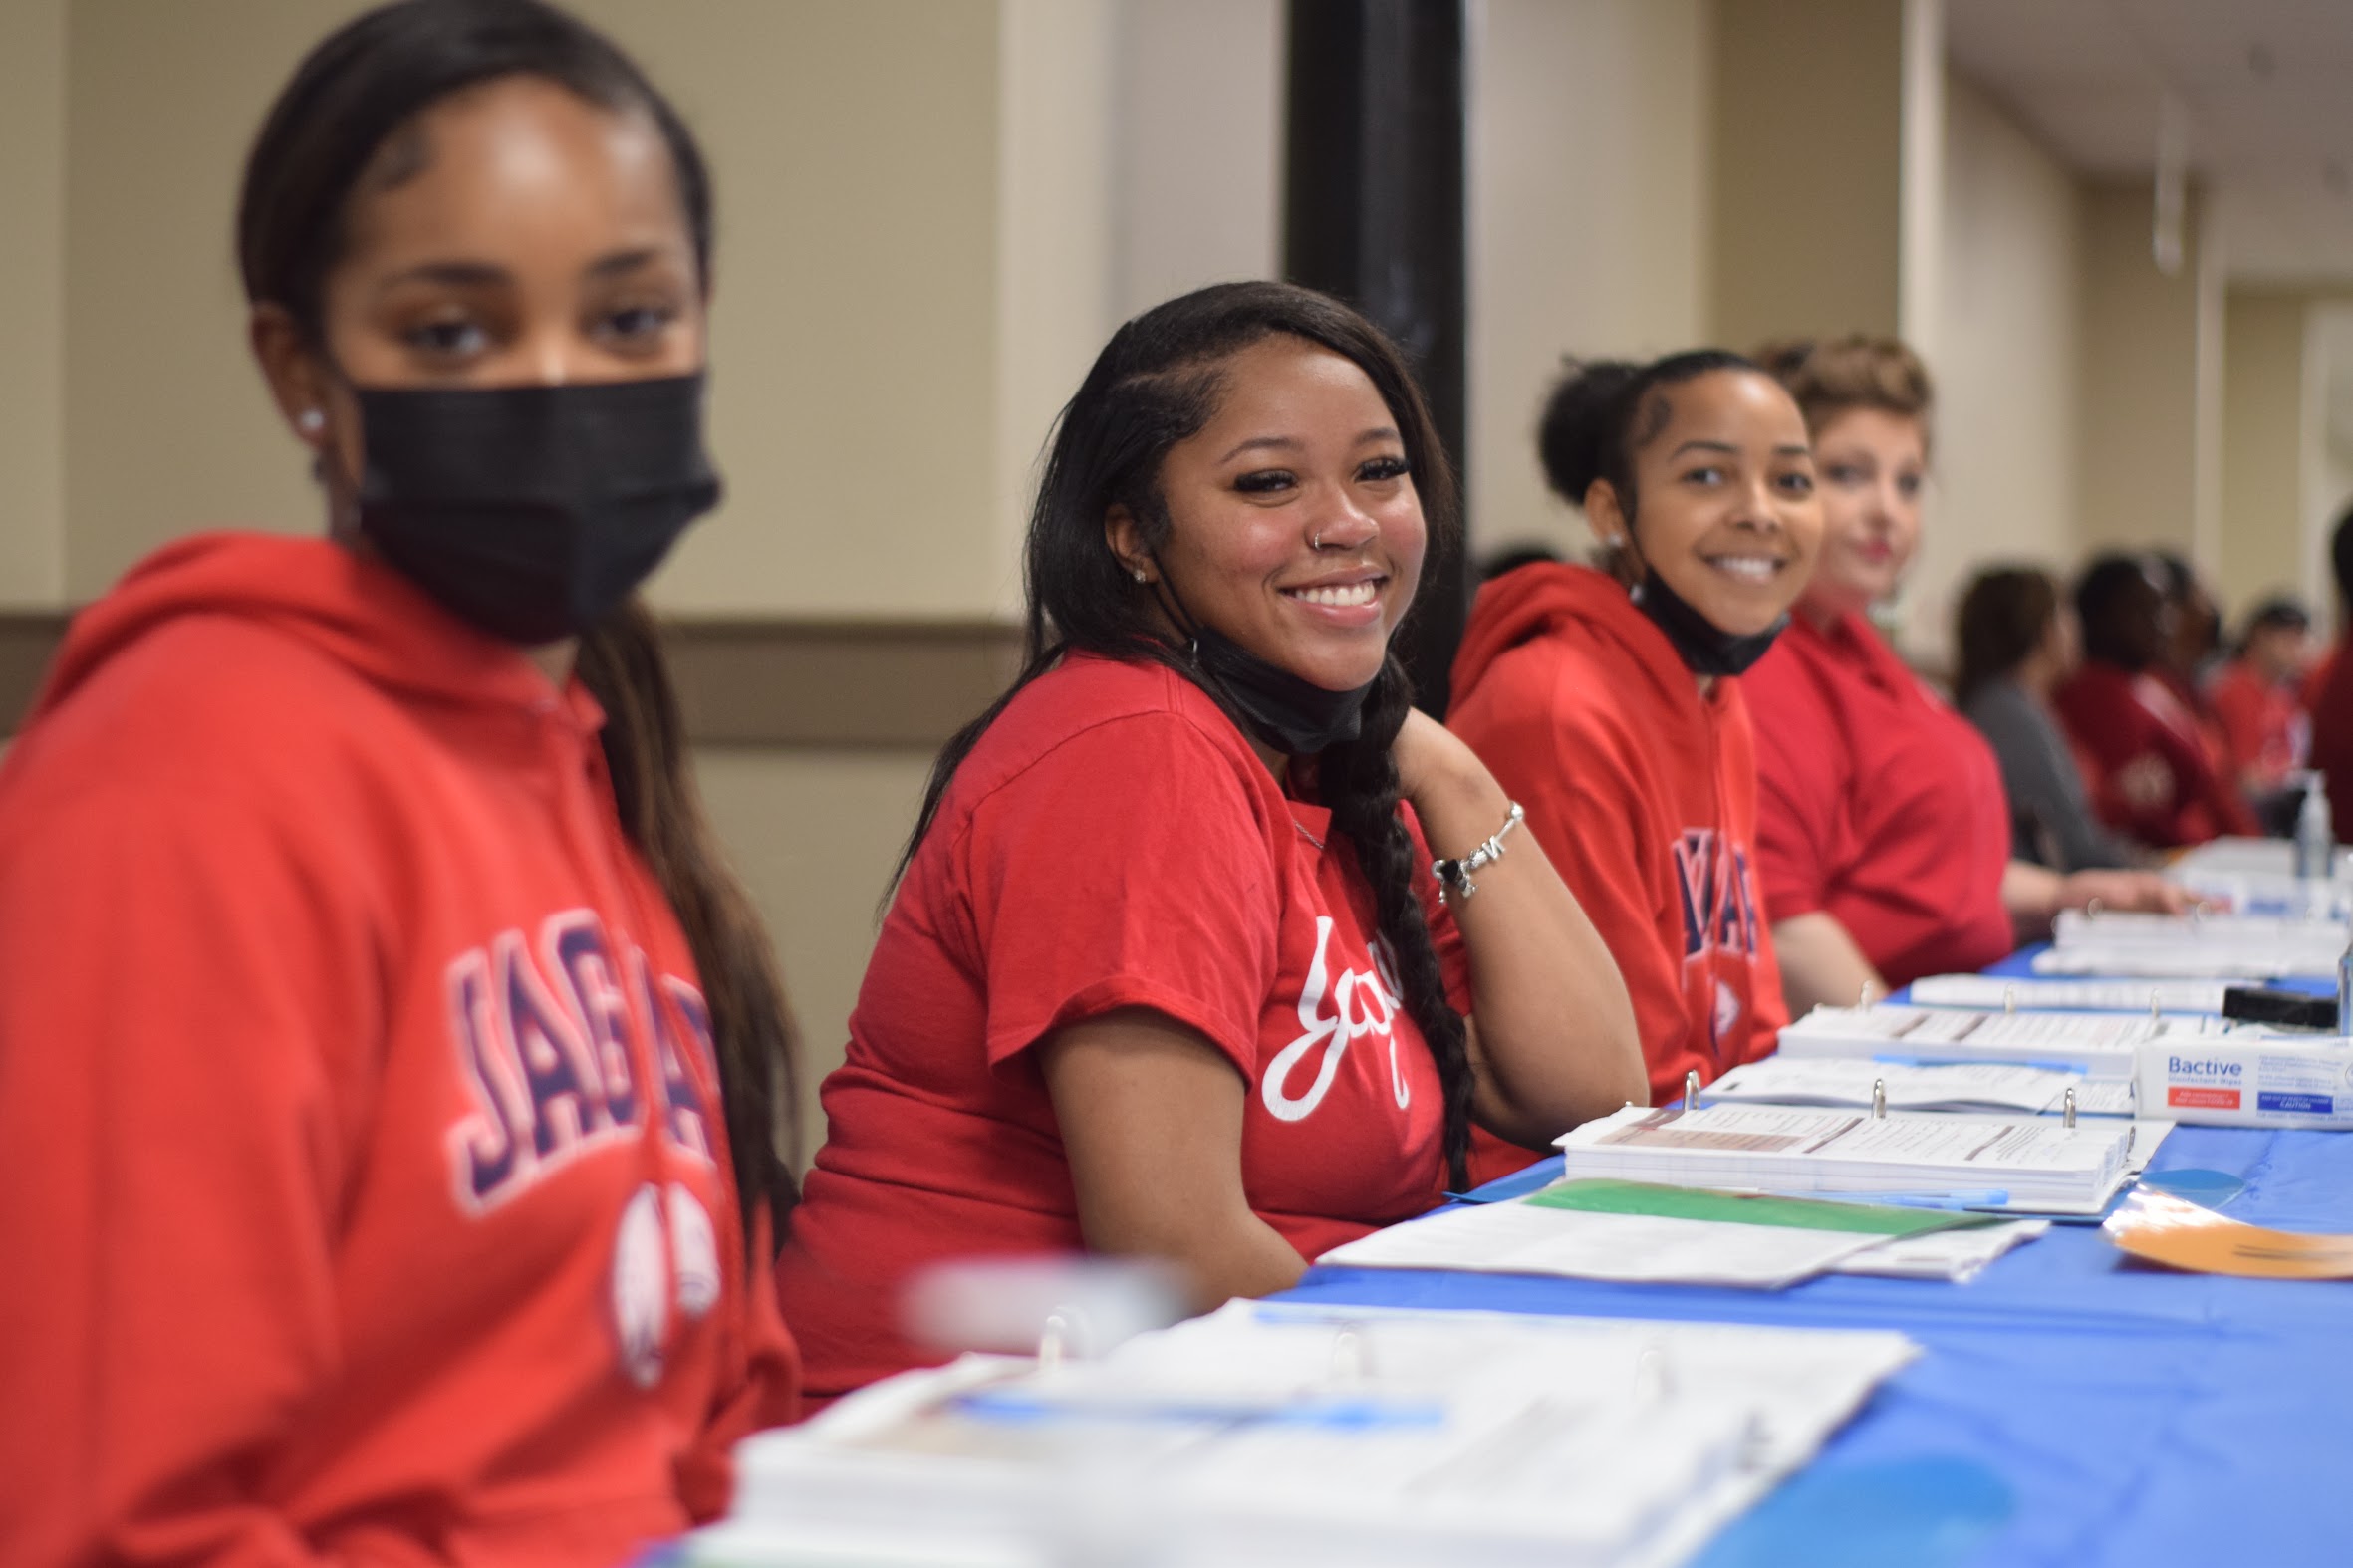 Smiling volunteers sitting at a table